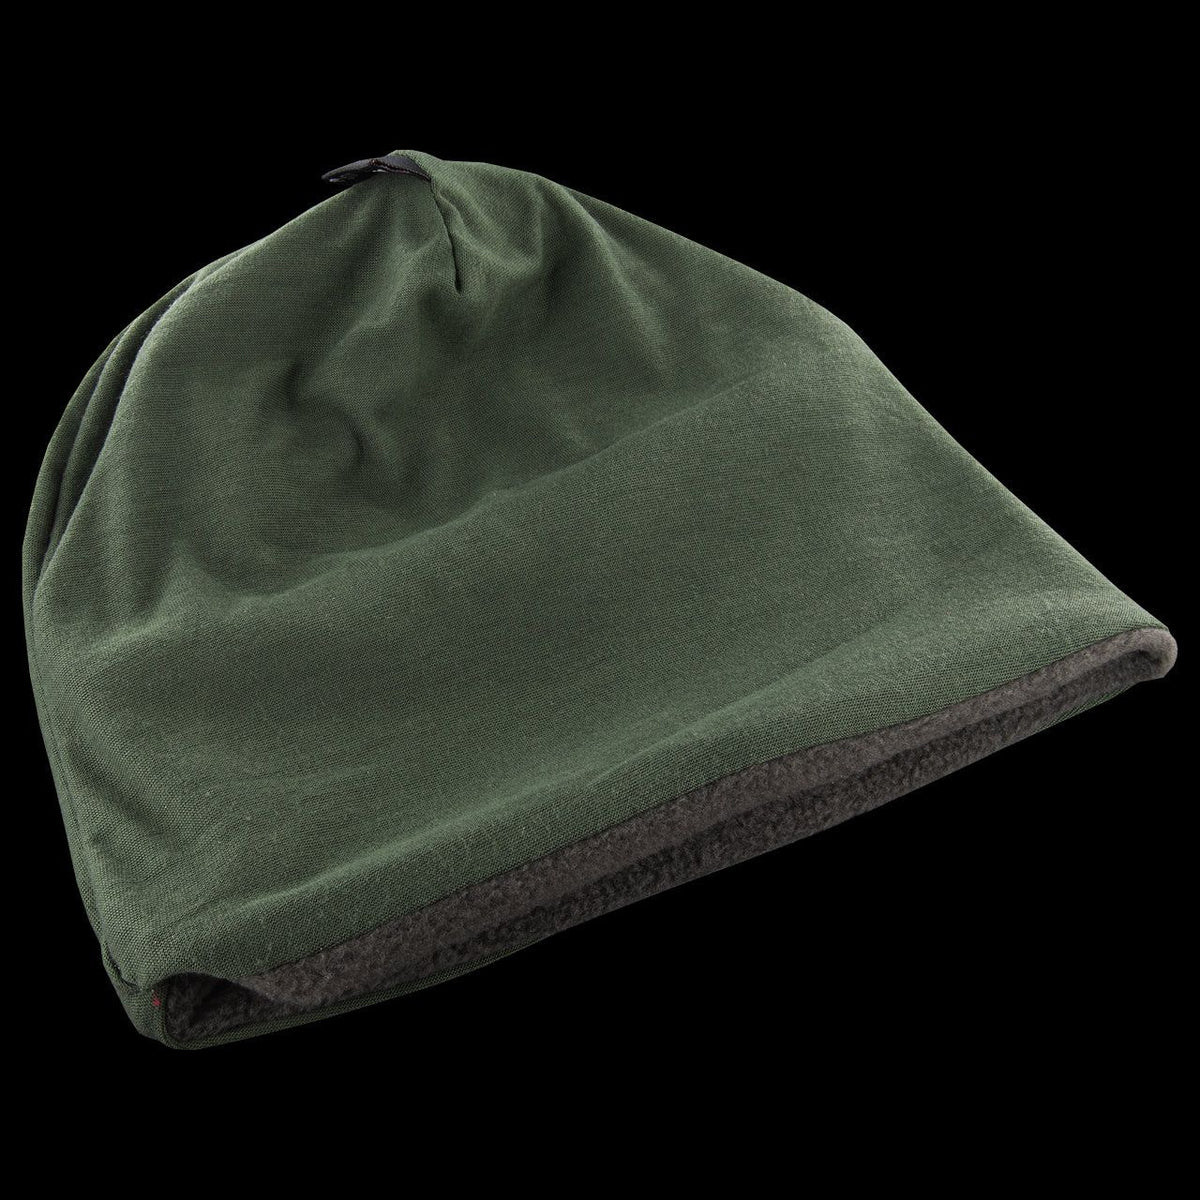 Ussen Baltic Thermal Hat - Olive